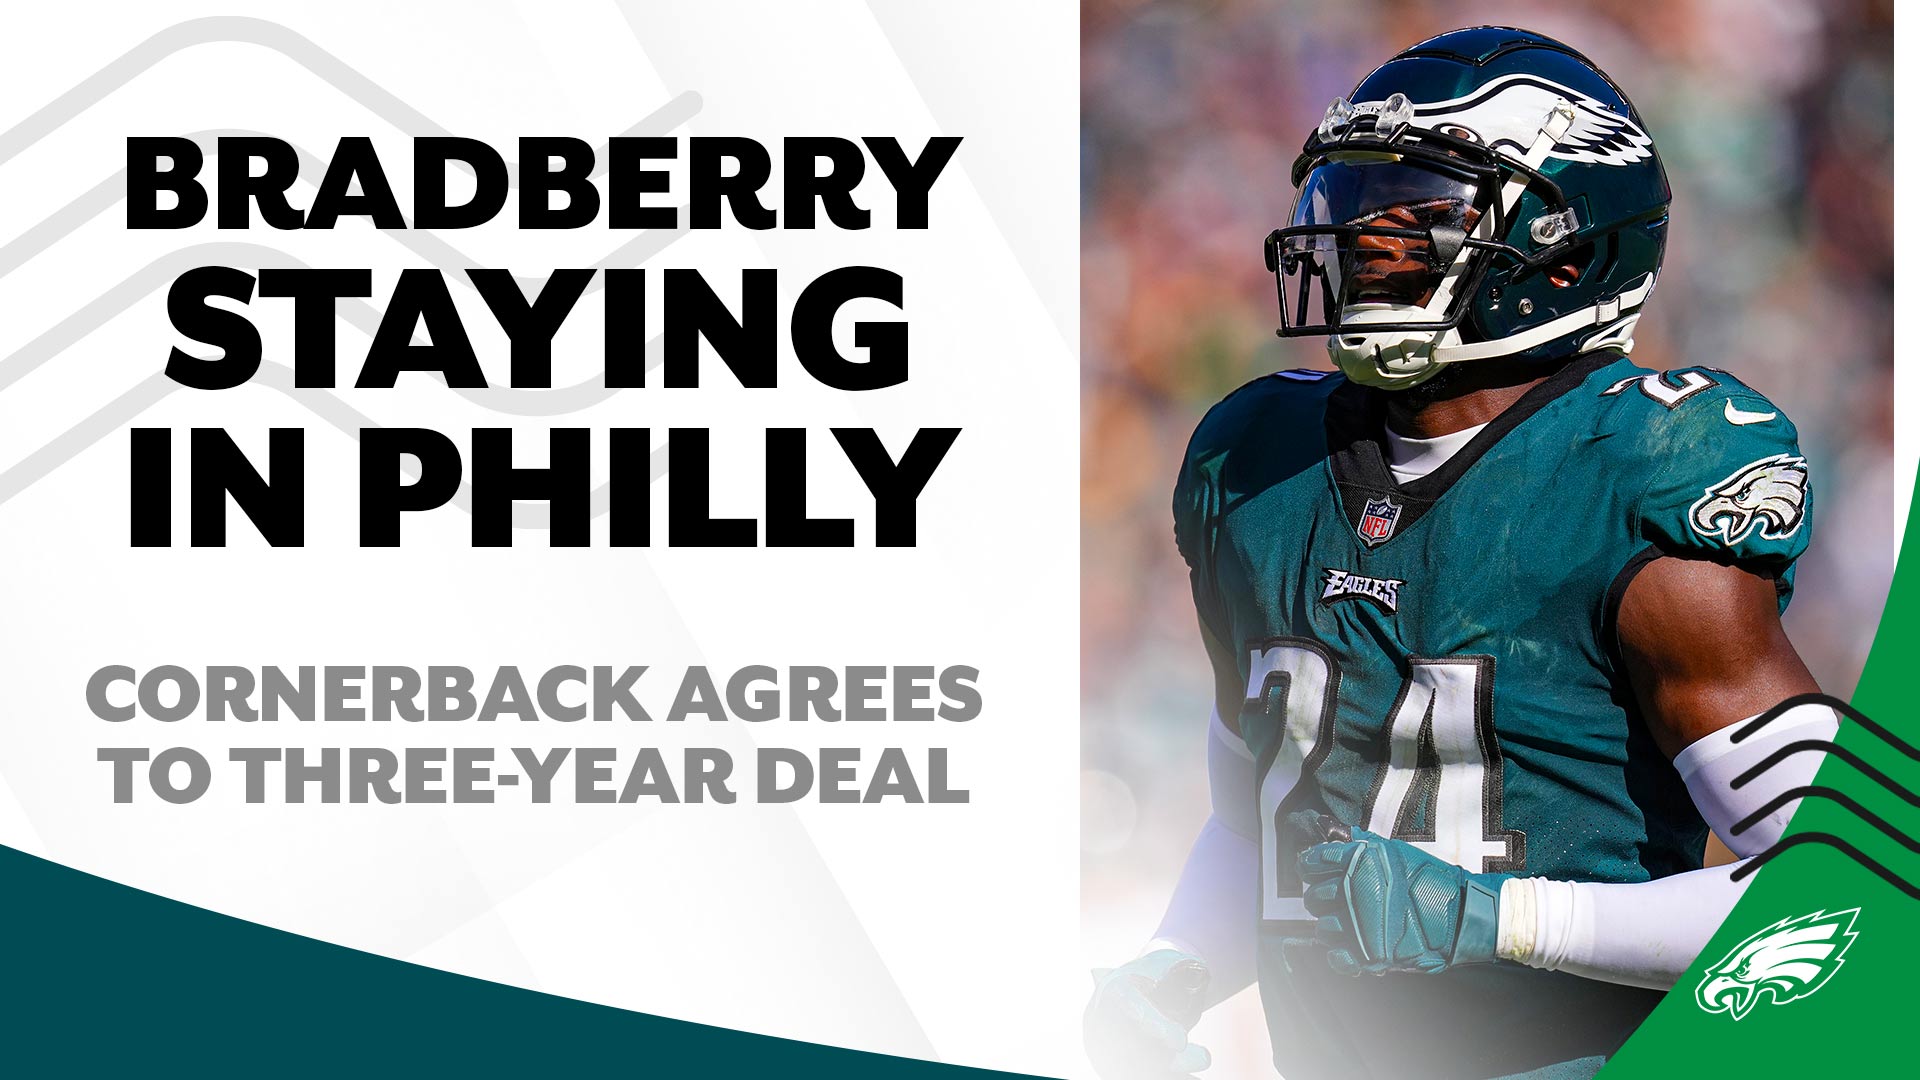 James Bradberry sticking with Eagles, agrees to three-year deal